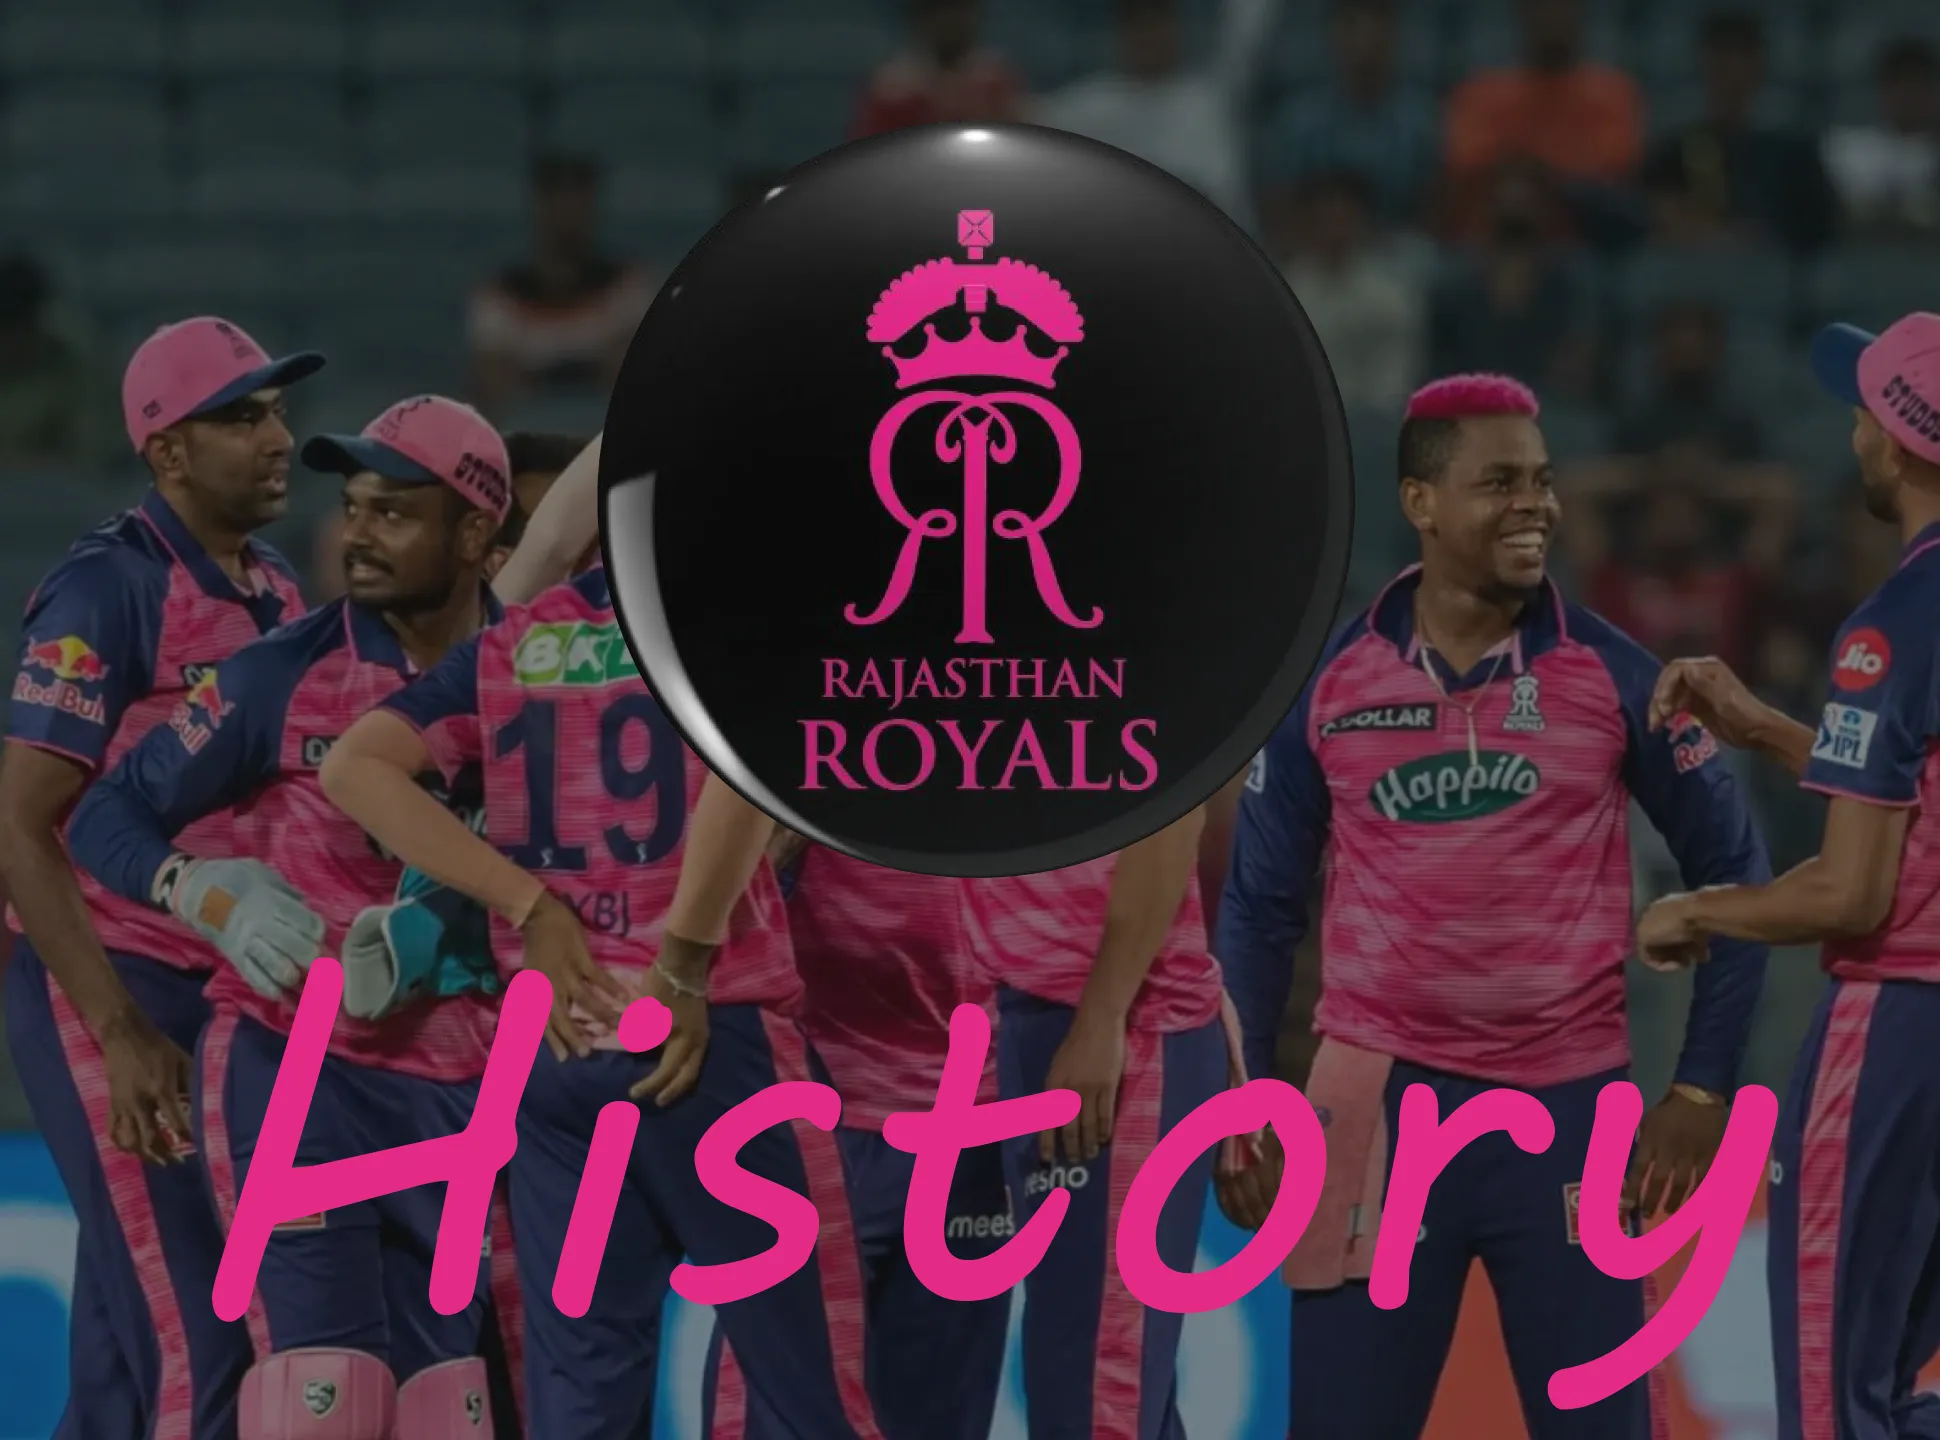 Rajasthan Royals started its history in 2008.